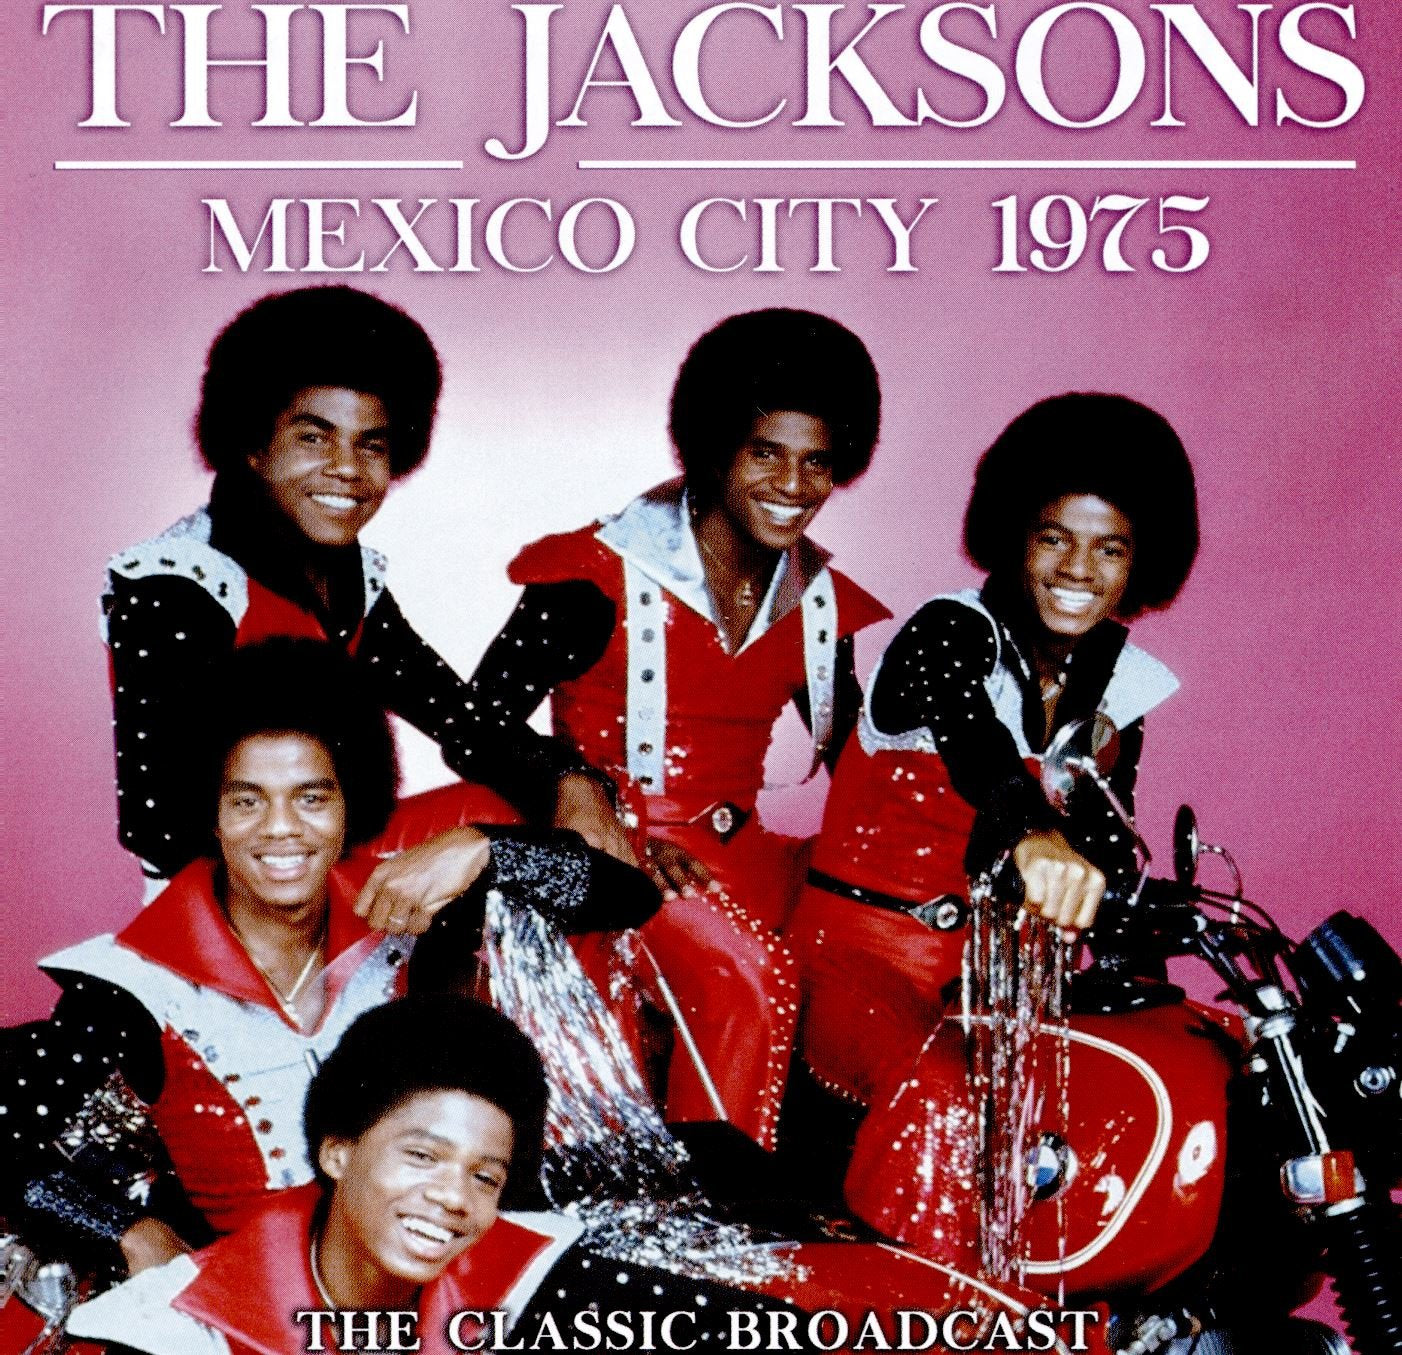 JACKSONS. THE – Mexico City 1975 (The Classic Broadcast)